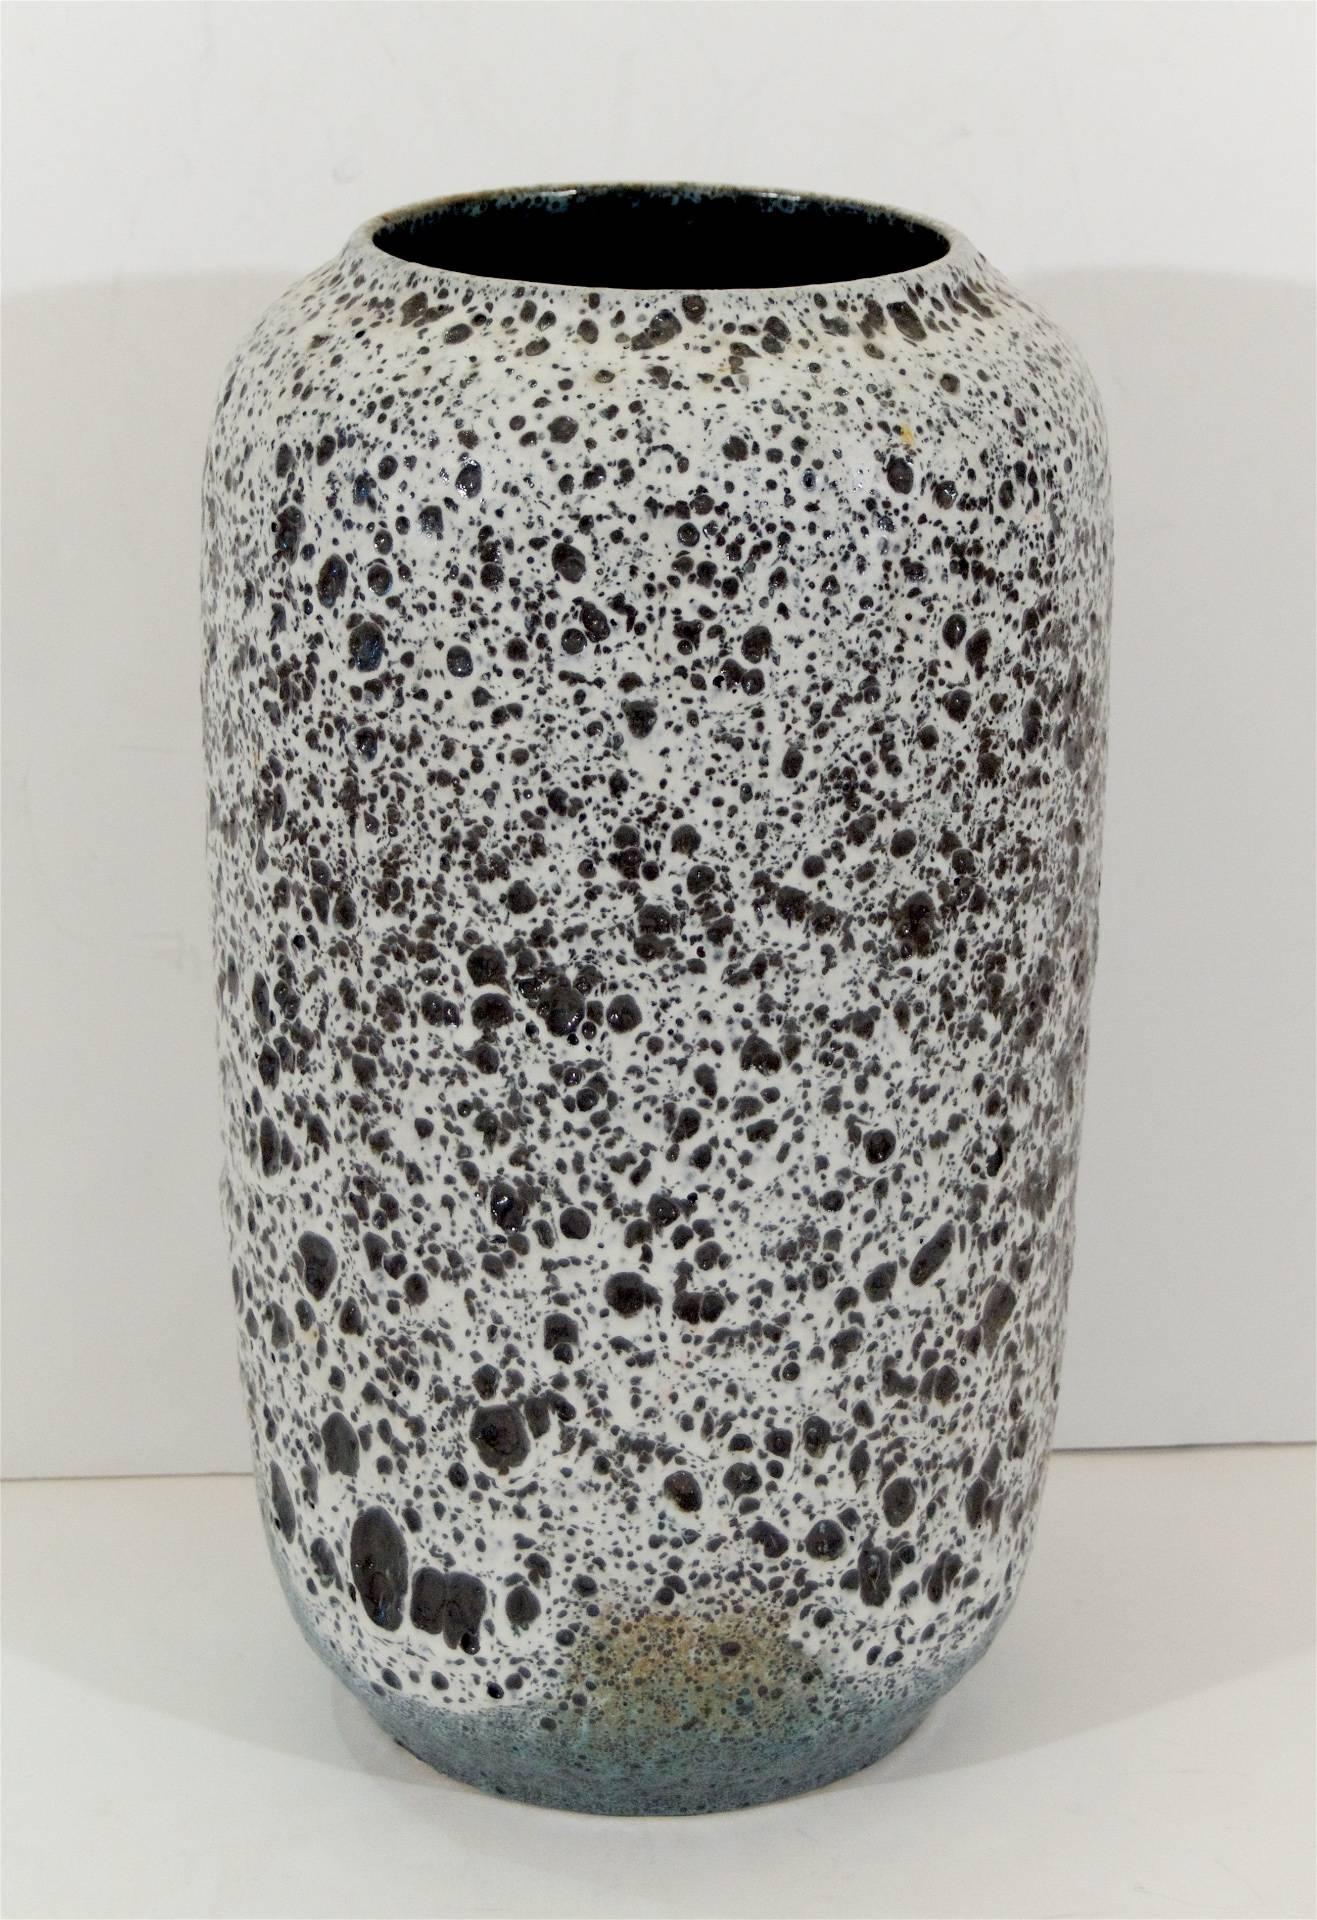 Uniquely patterned and well-formed ceramic vase by Scheurich Keramik. A dramatically heavy glazing texture with deep cratering, resembling the surface of pumice in a blend of deep earth tones, a white higher texture, and a sea foam accent glazing at